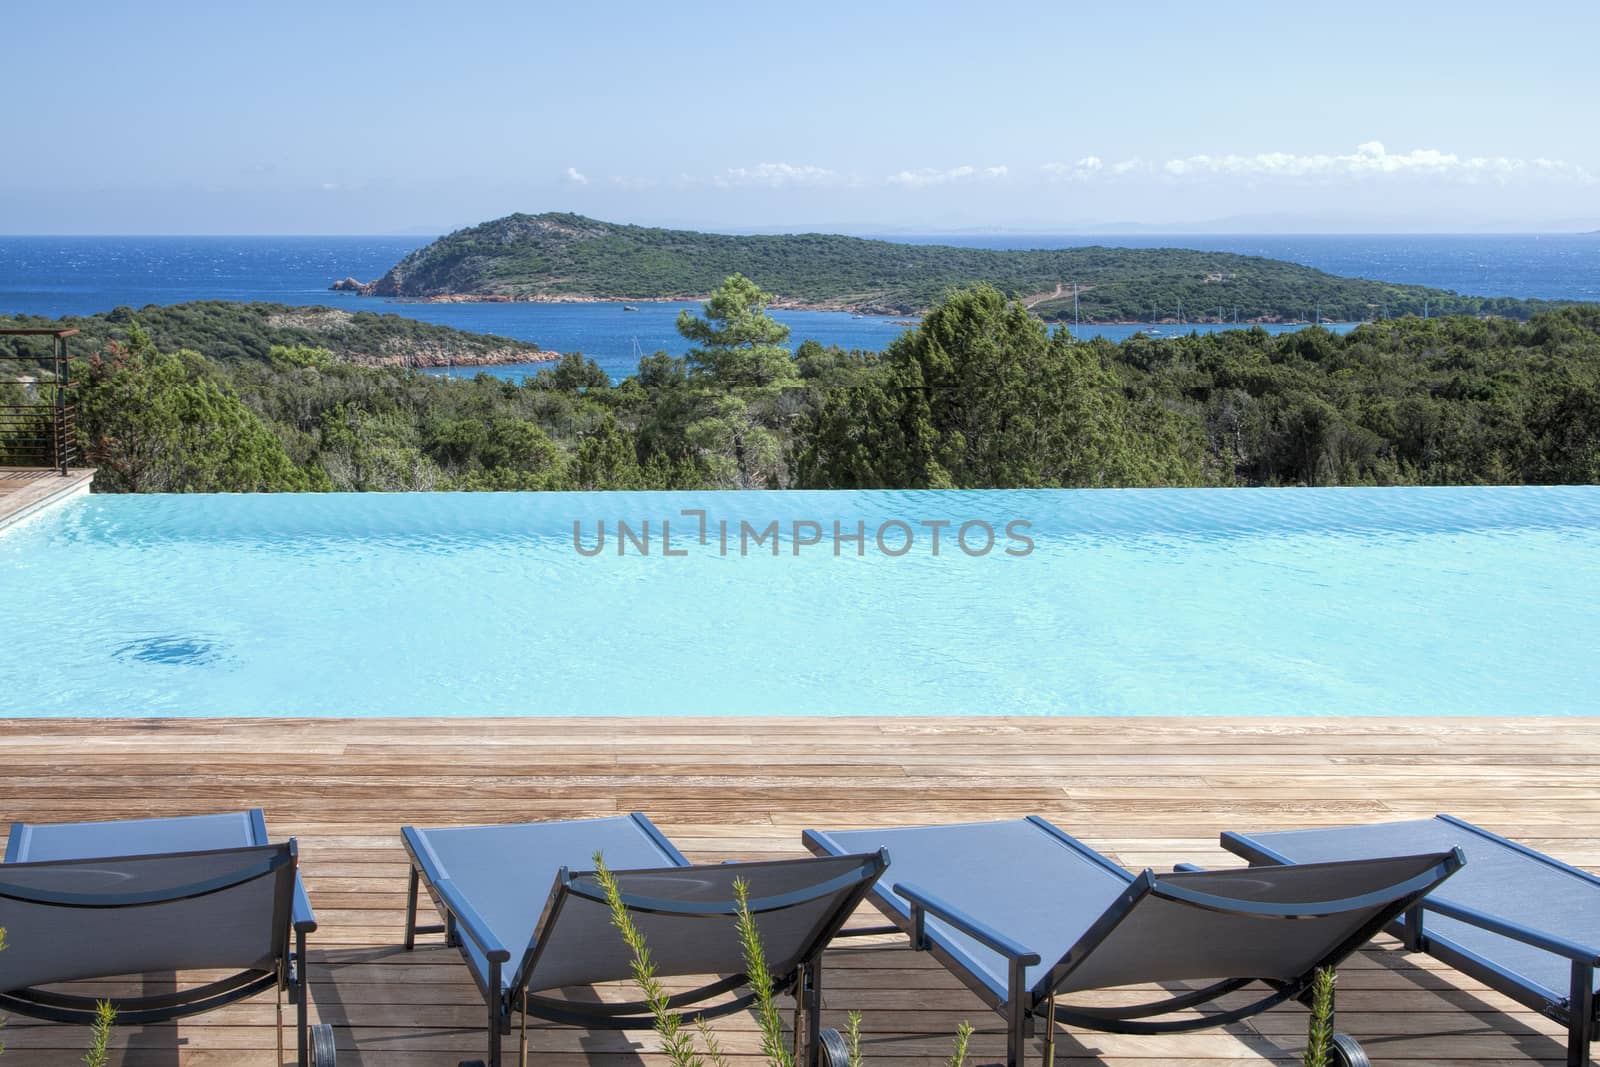 infinity pool and sea in corsica, france, europe